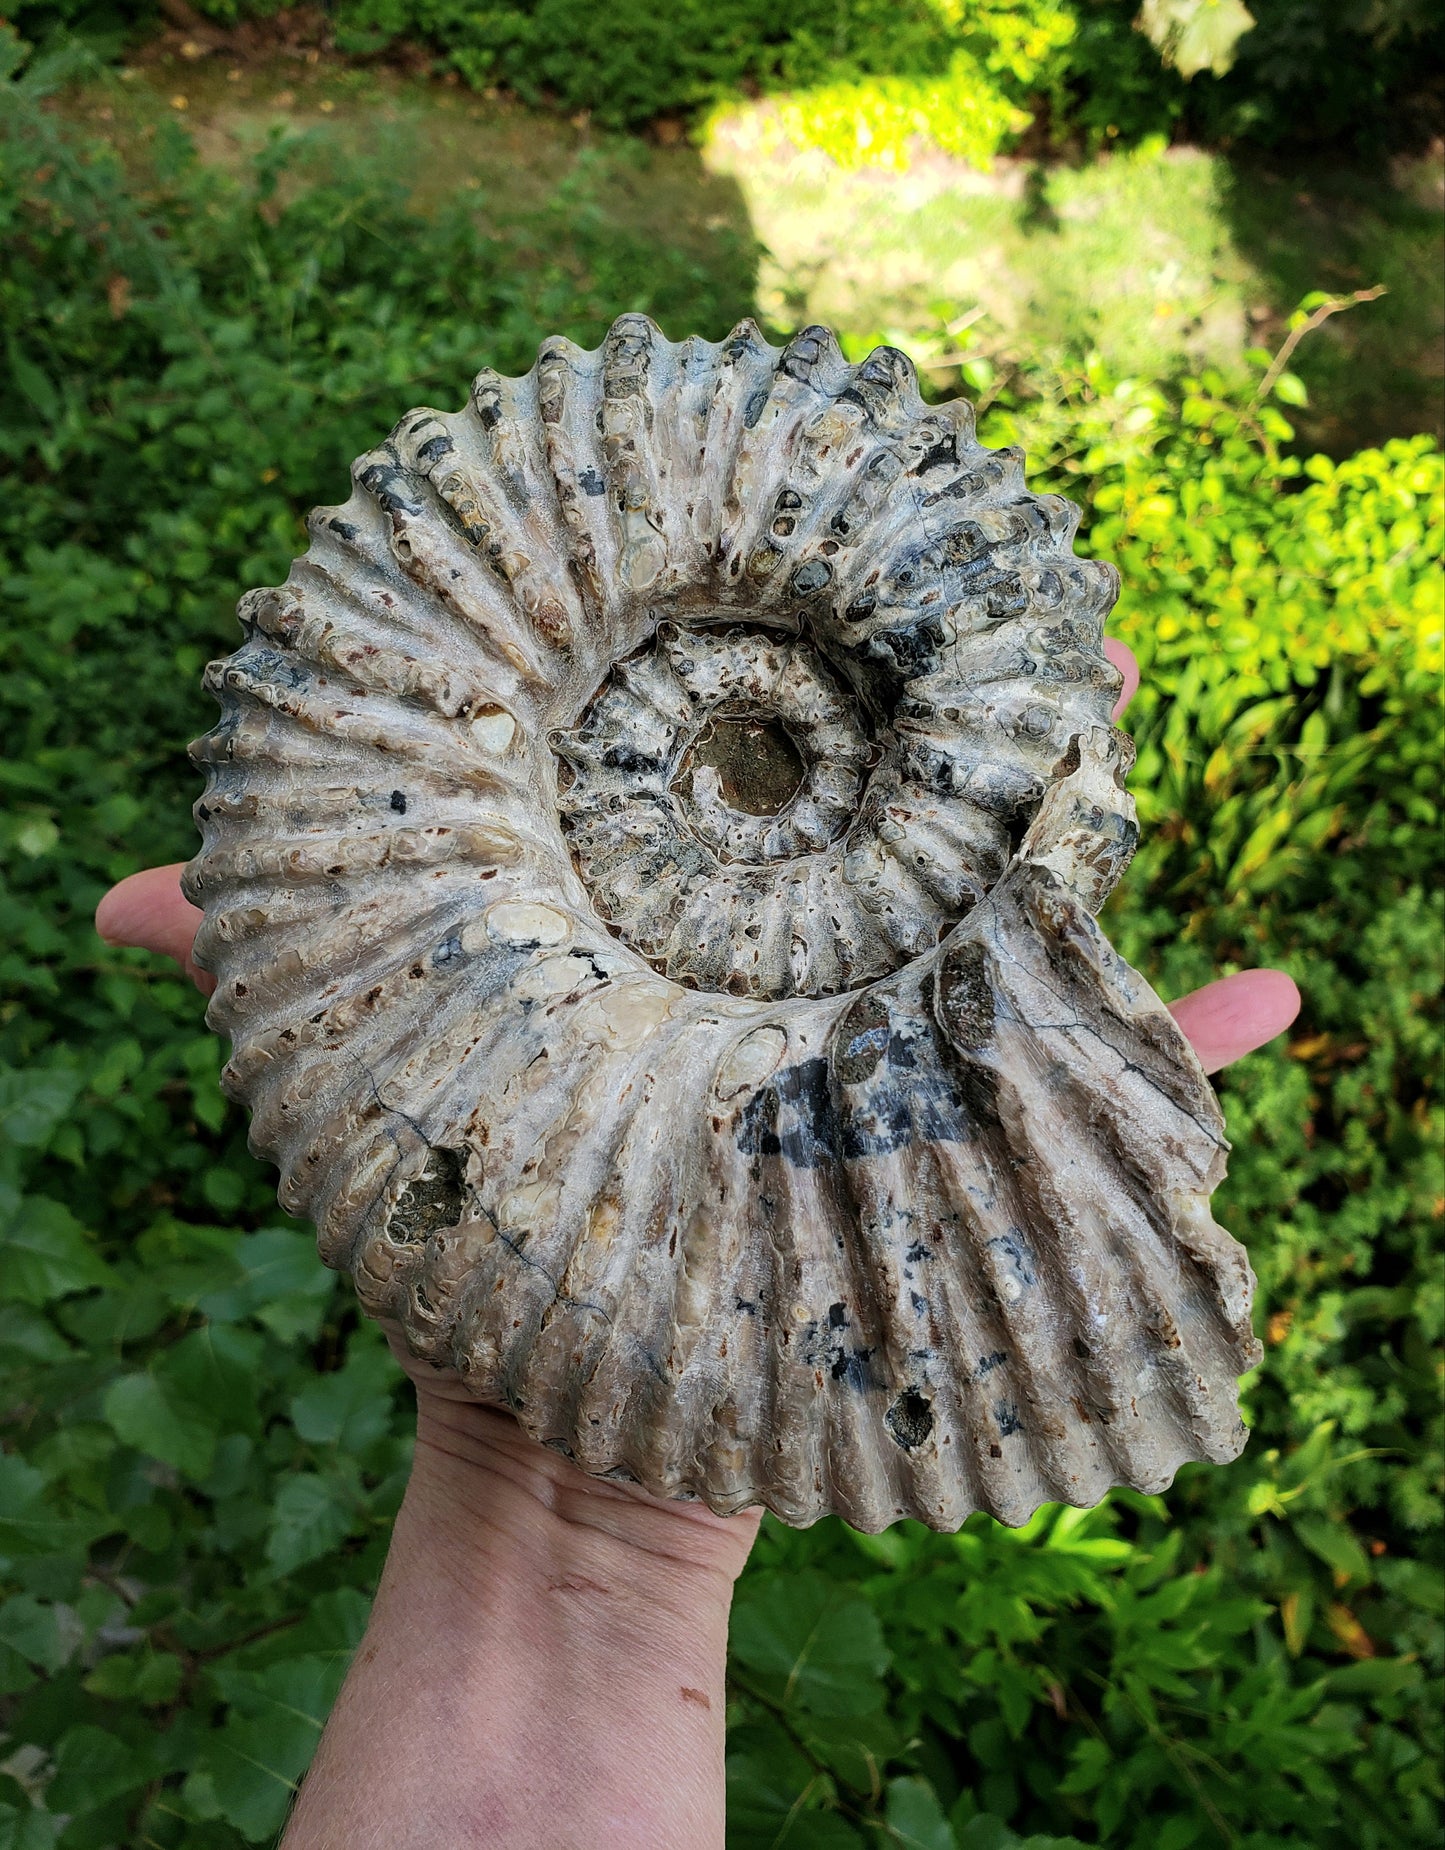 Tractor Ammonite Fossil from Madagascar